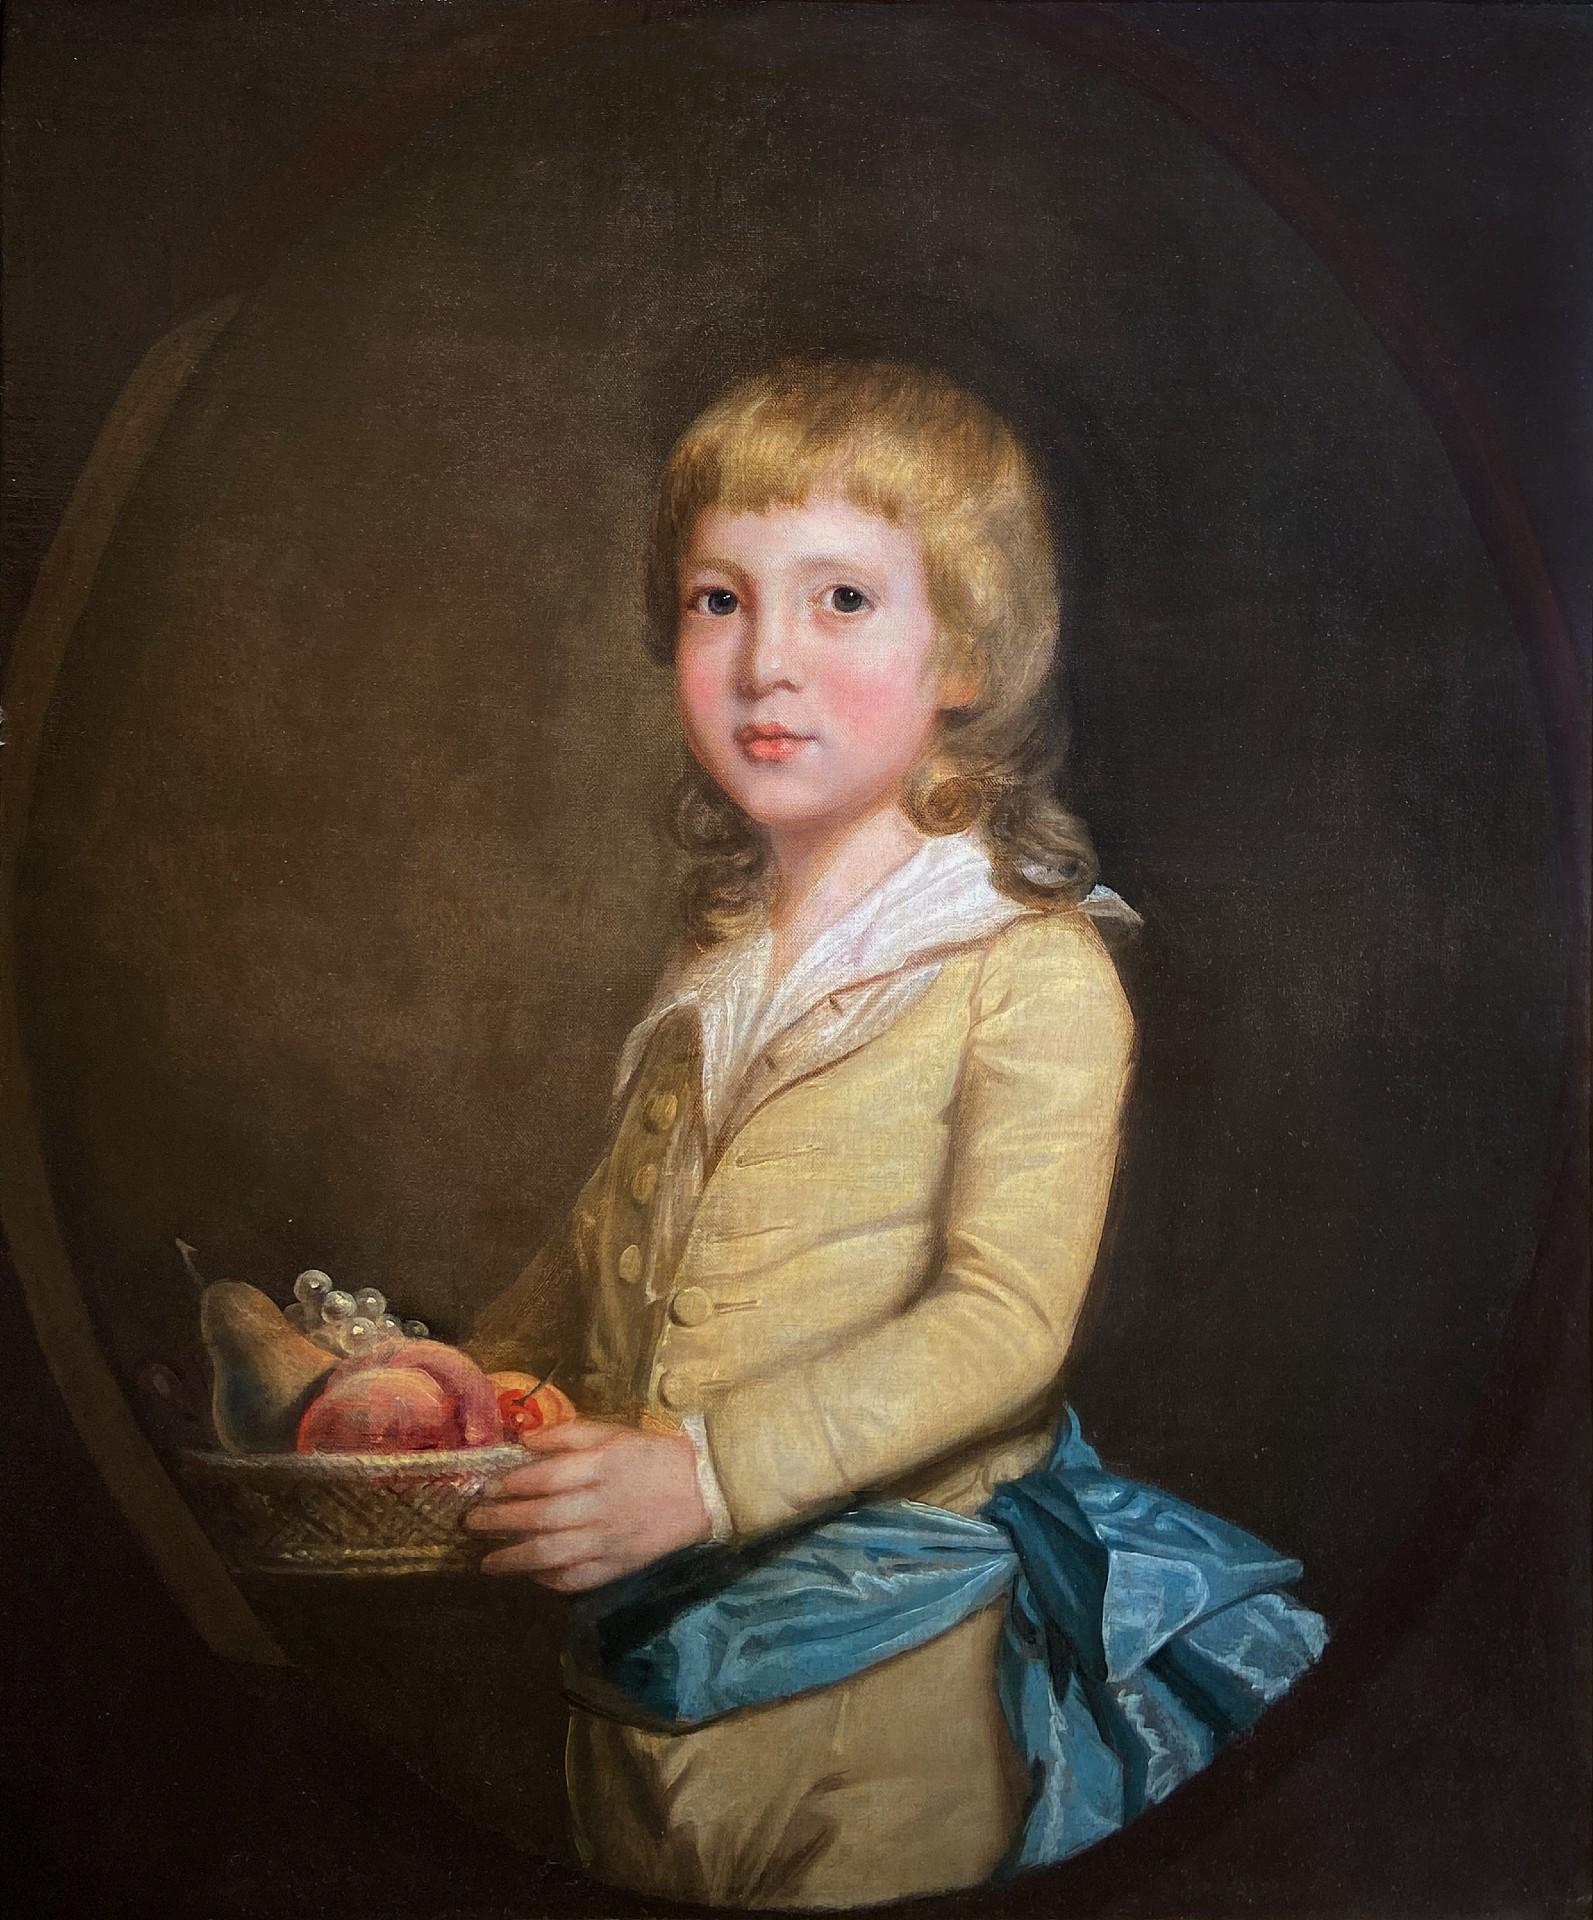 Portrait of a Young Boy Carrying a Fruit Basket, 18th Century Oil on Canvas